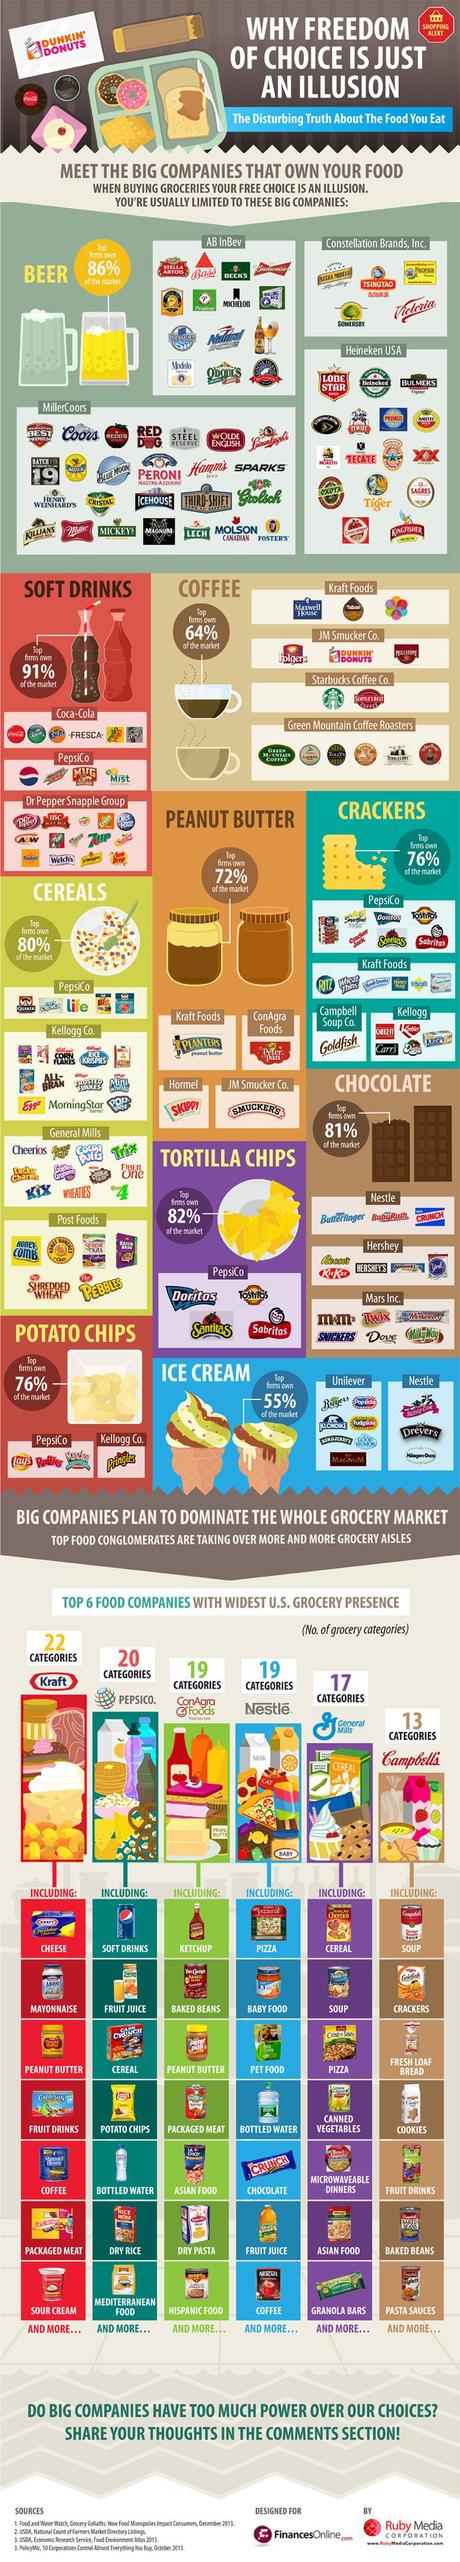 Top Grocery Brands Comparison: Disturbing Truth About How Big Food Companies Exploit Your Shopping Habits and Monopolize the Market